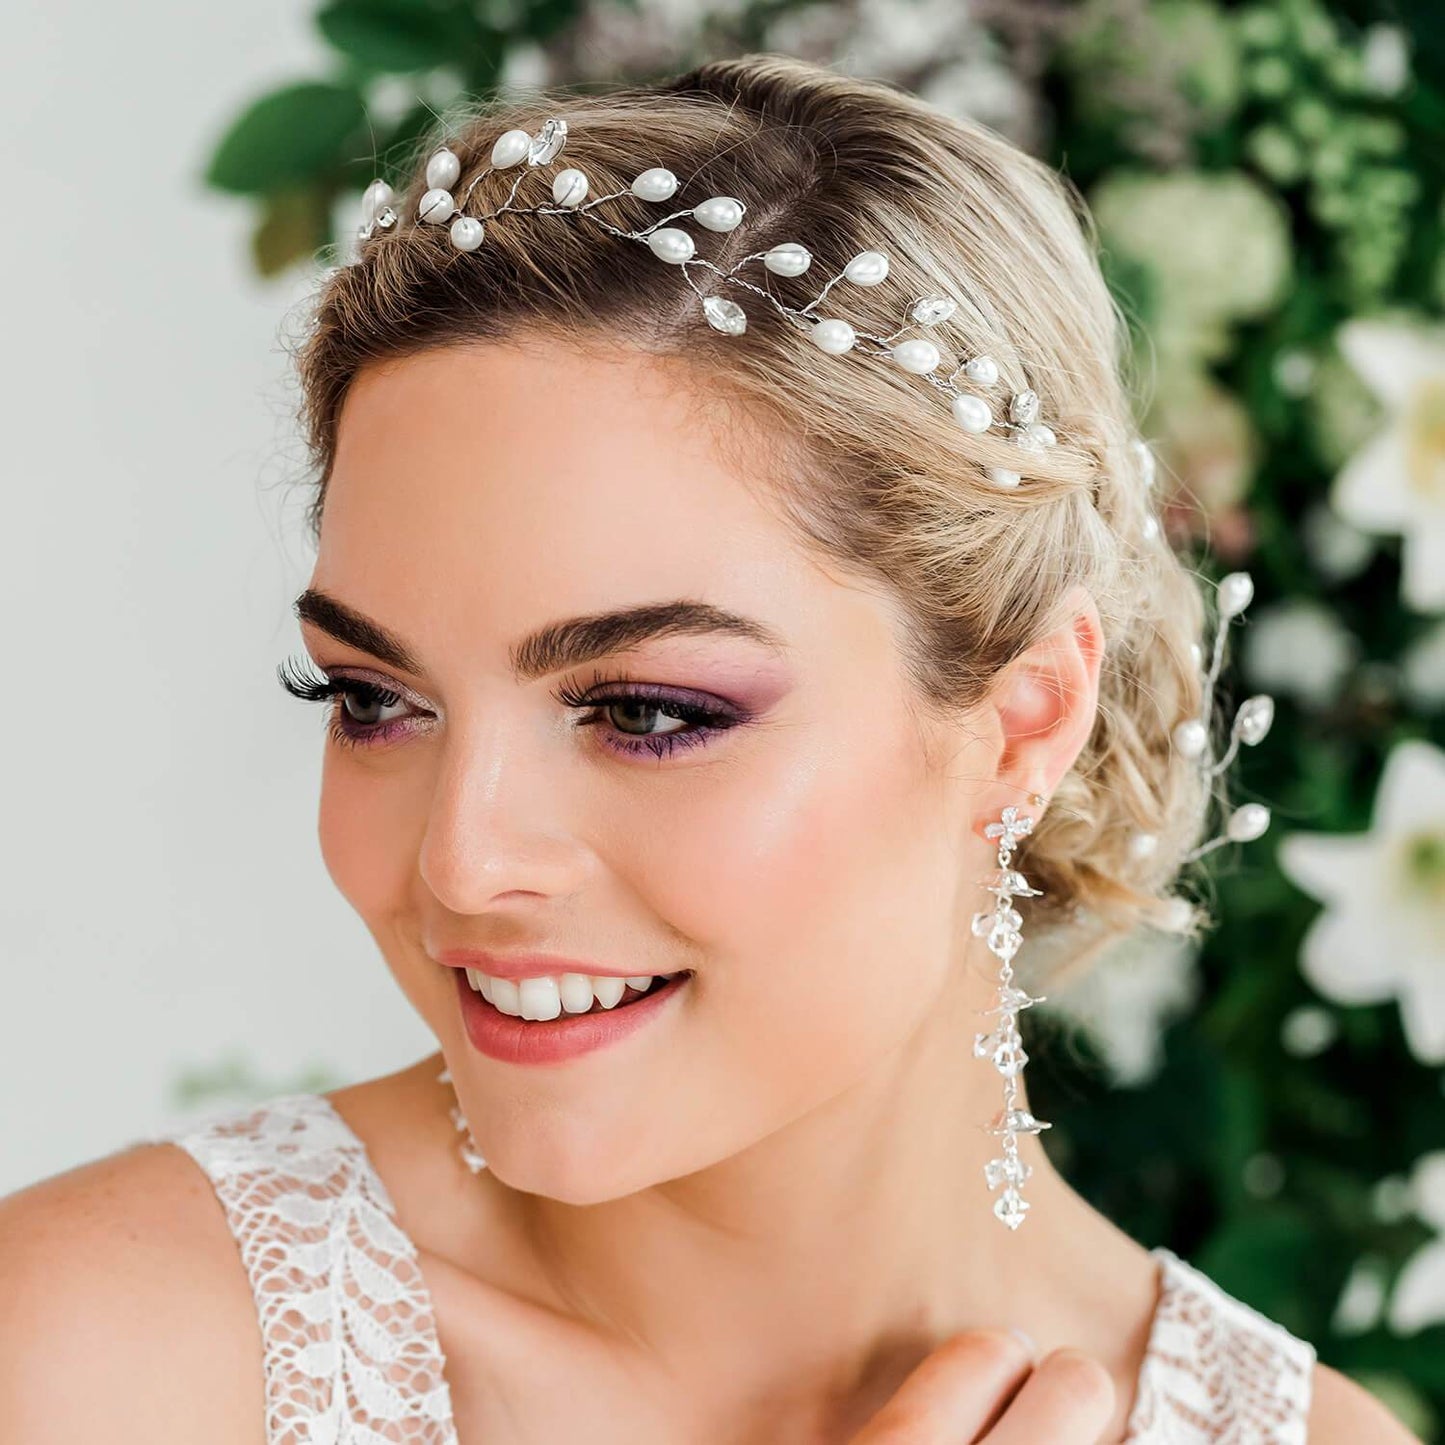 Silver Ivy Bridal Hair Vine Headpiece from front